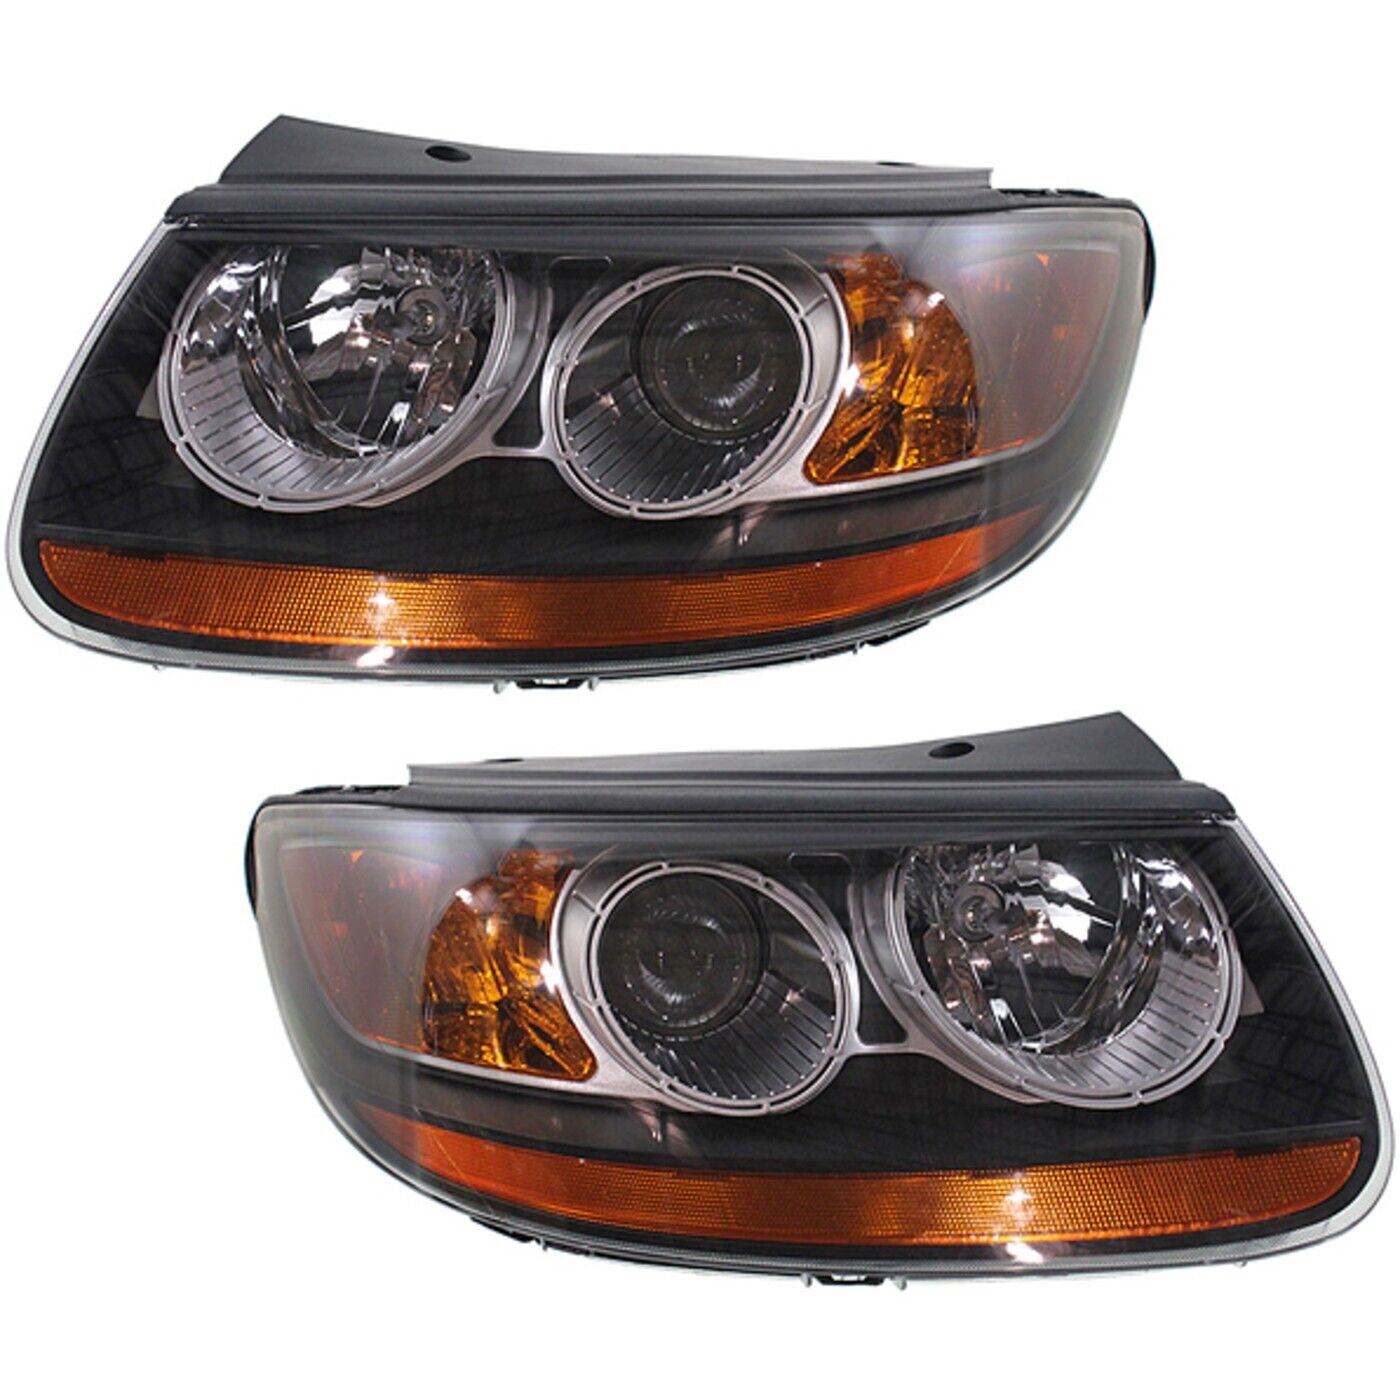 Headlight Set For 07-09 Hyundai Santa Fe with 2-Plug-In Connector Left and Right